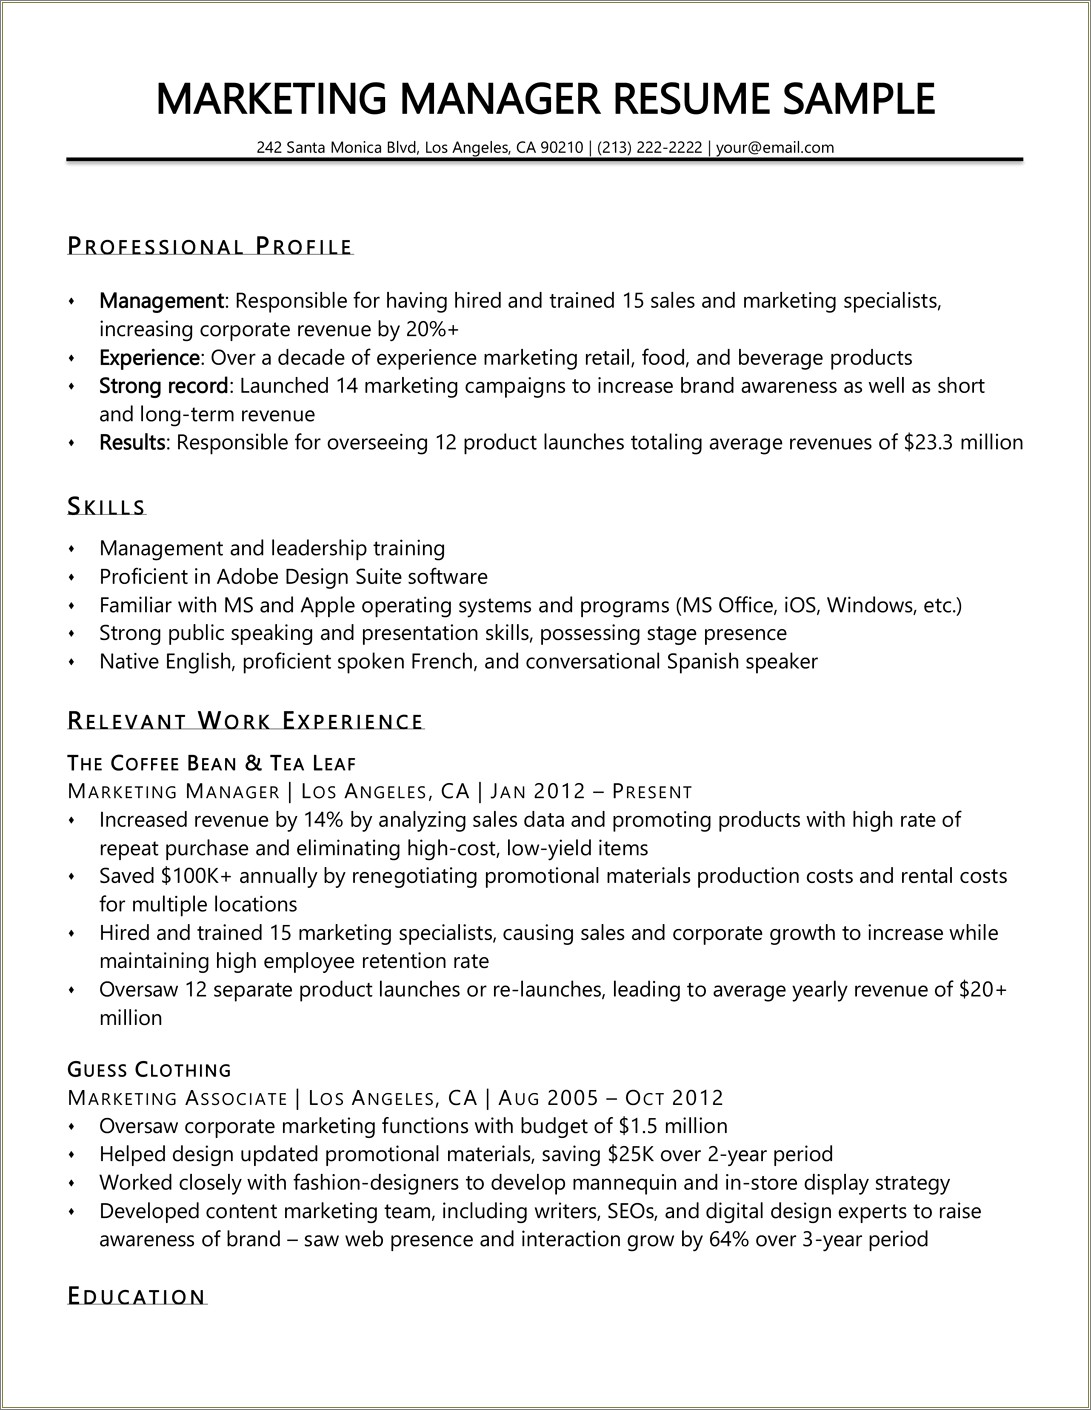 Best Resume Format For Experienced Marketing Professionals